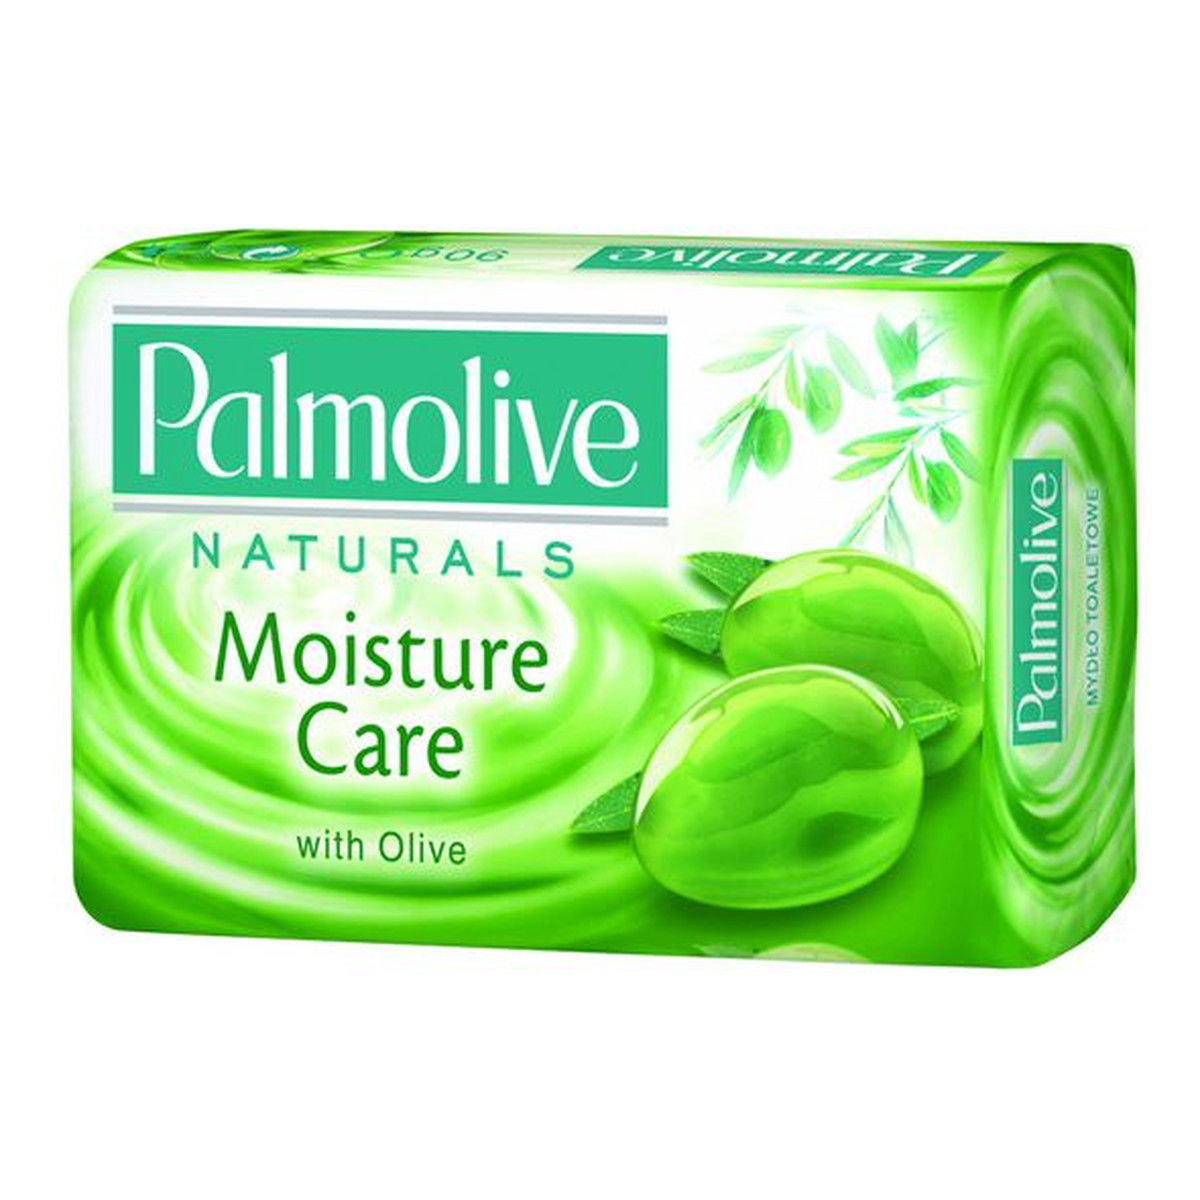 Palmolive Naturals Moisture Care Mydło toaletowe 90g